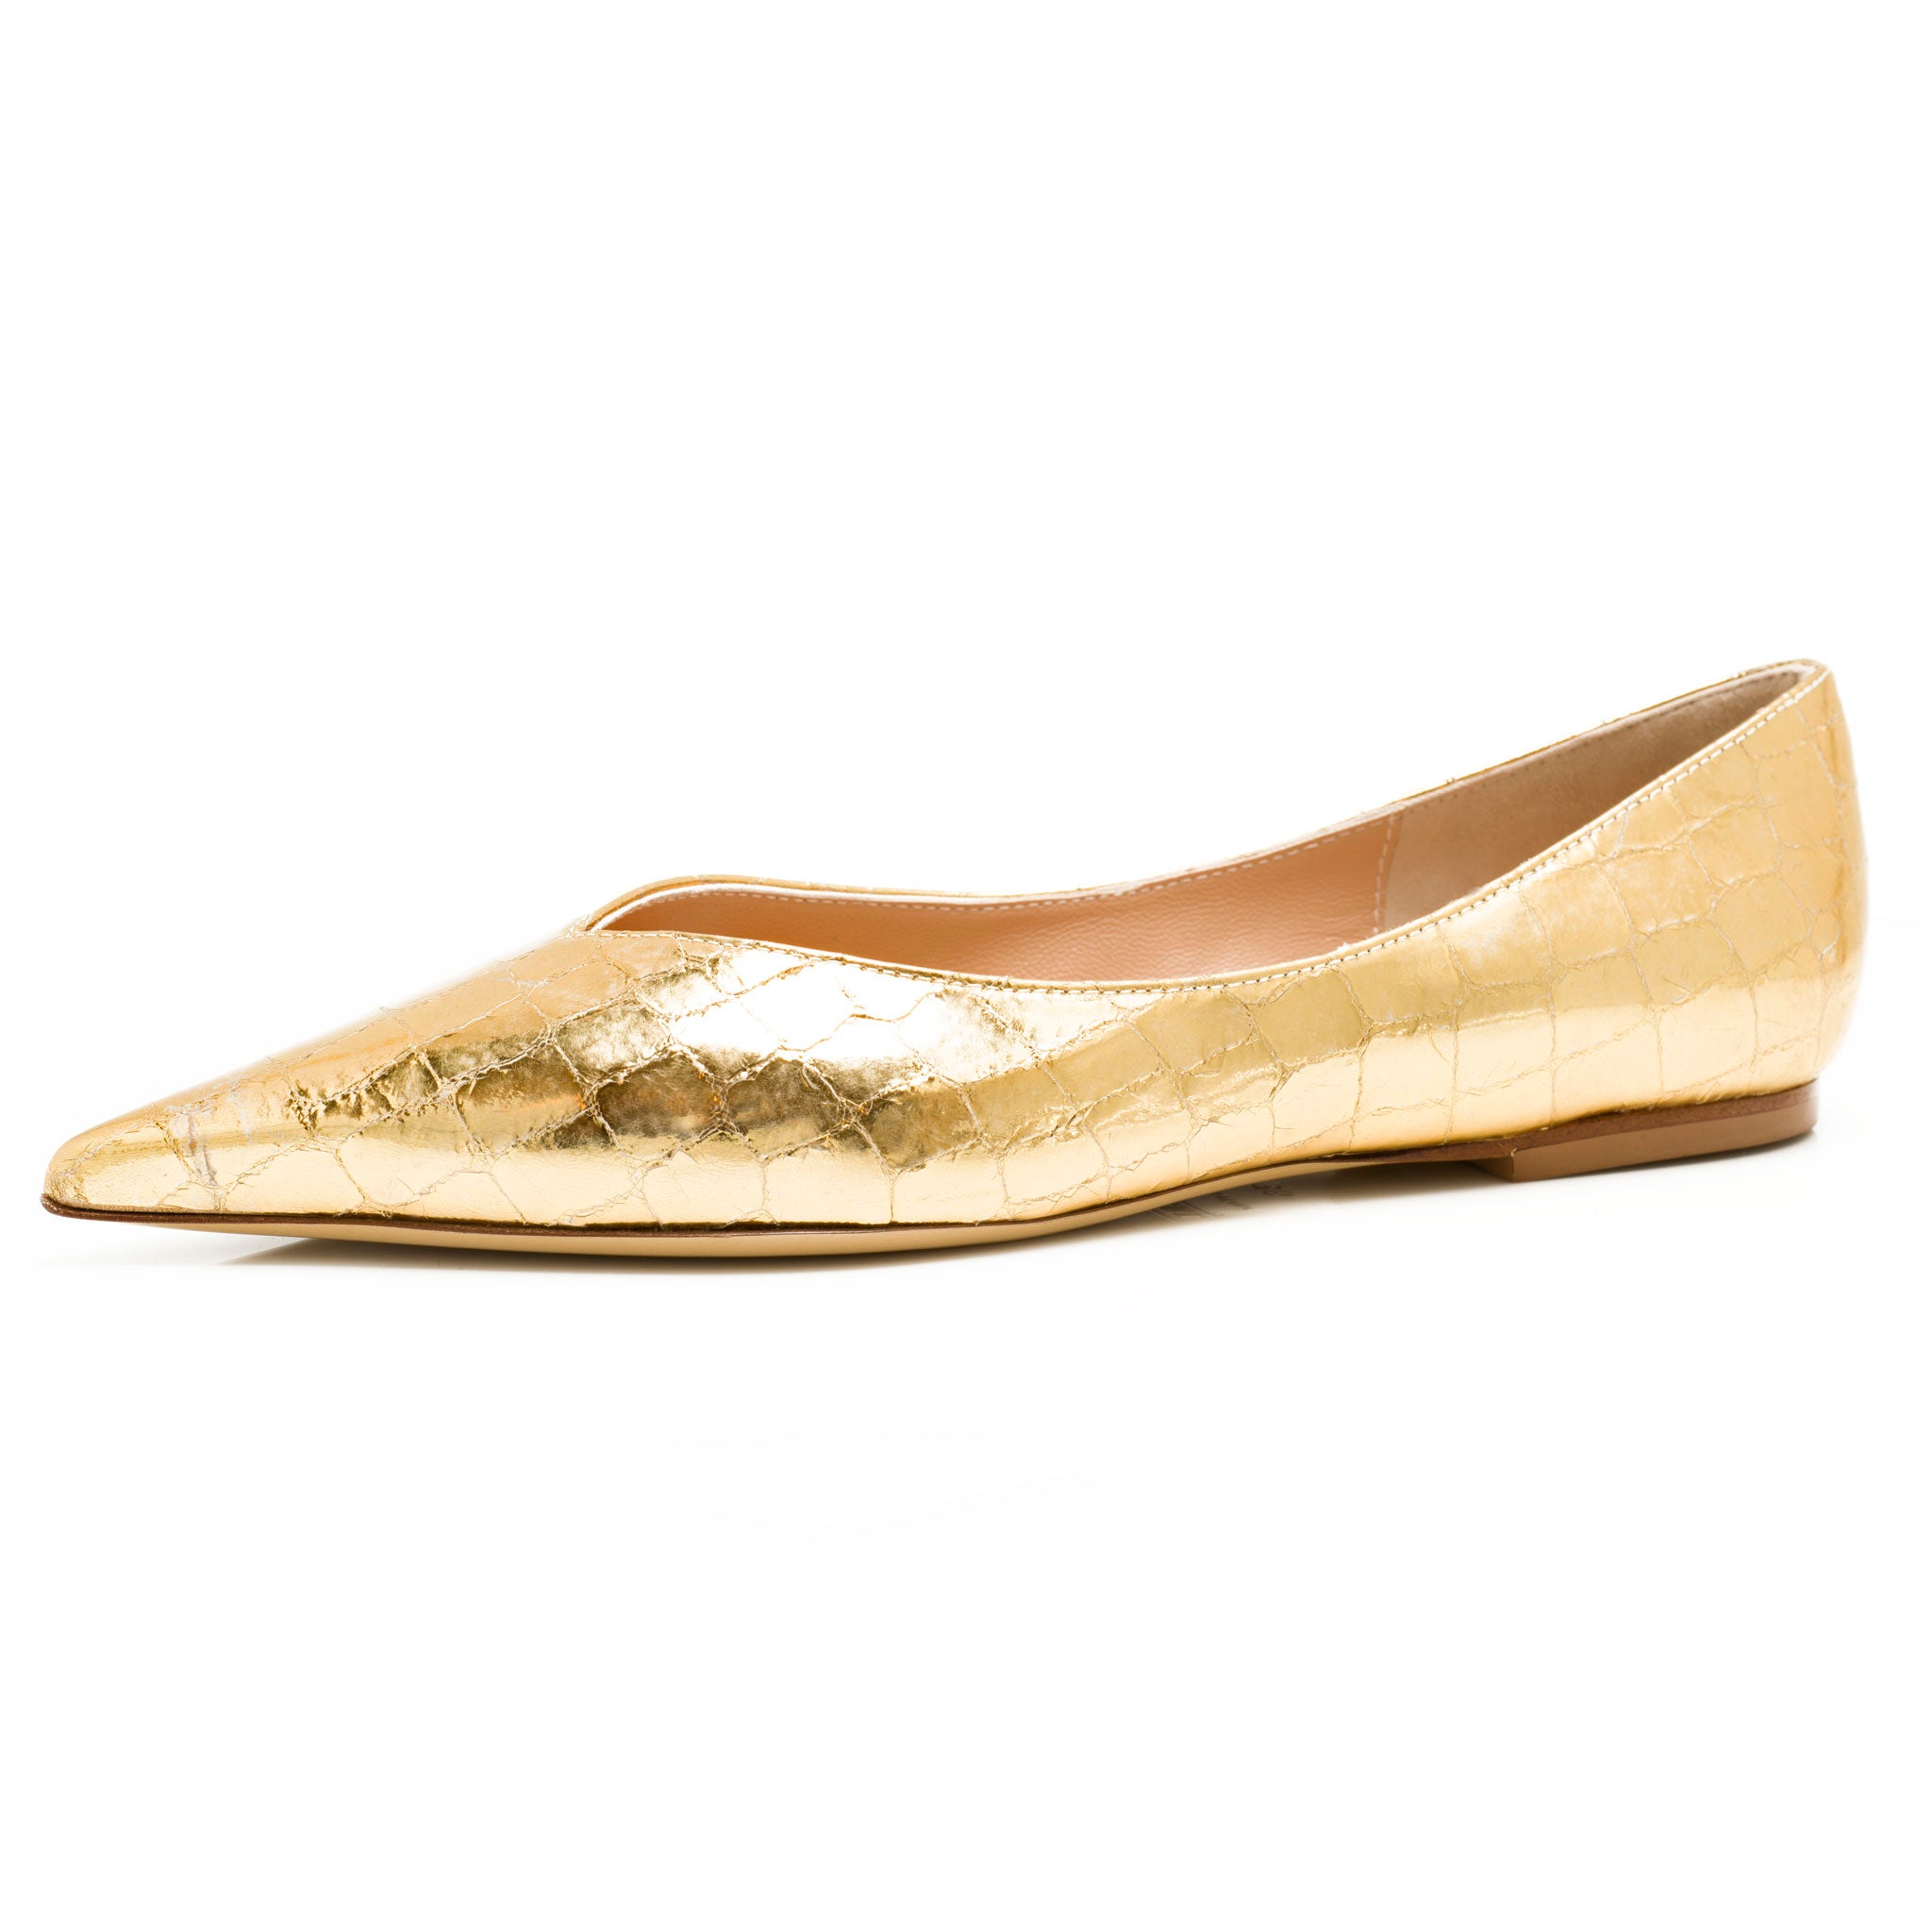 women's gold pointed toe flats shoes